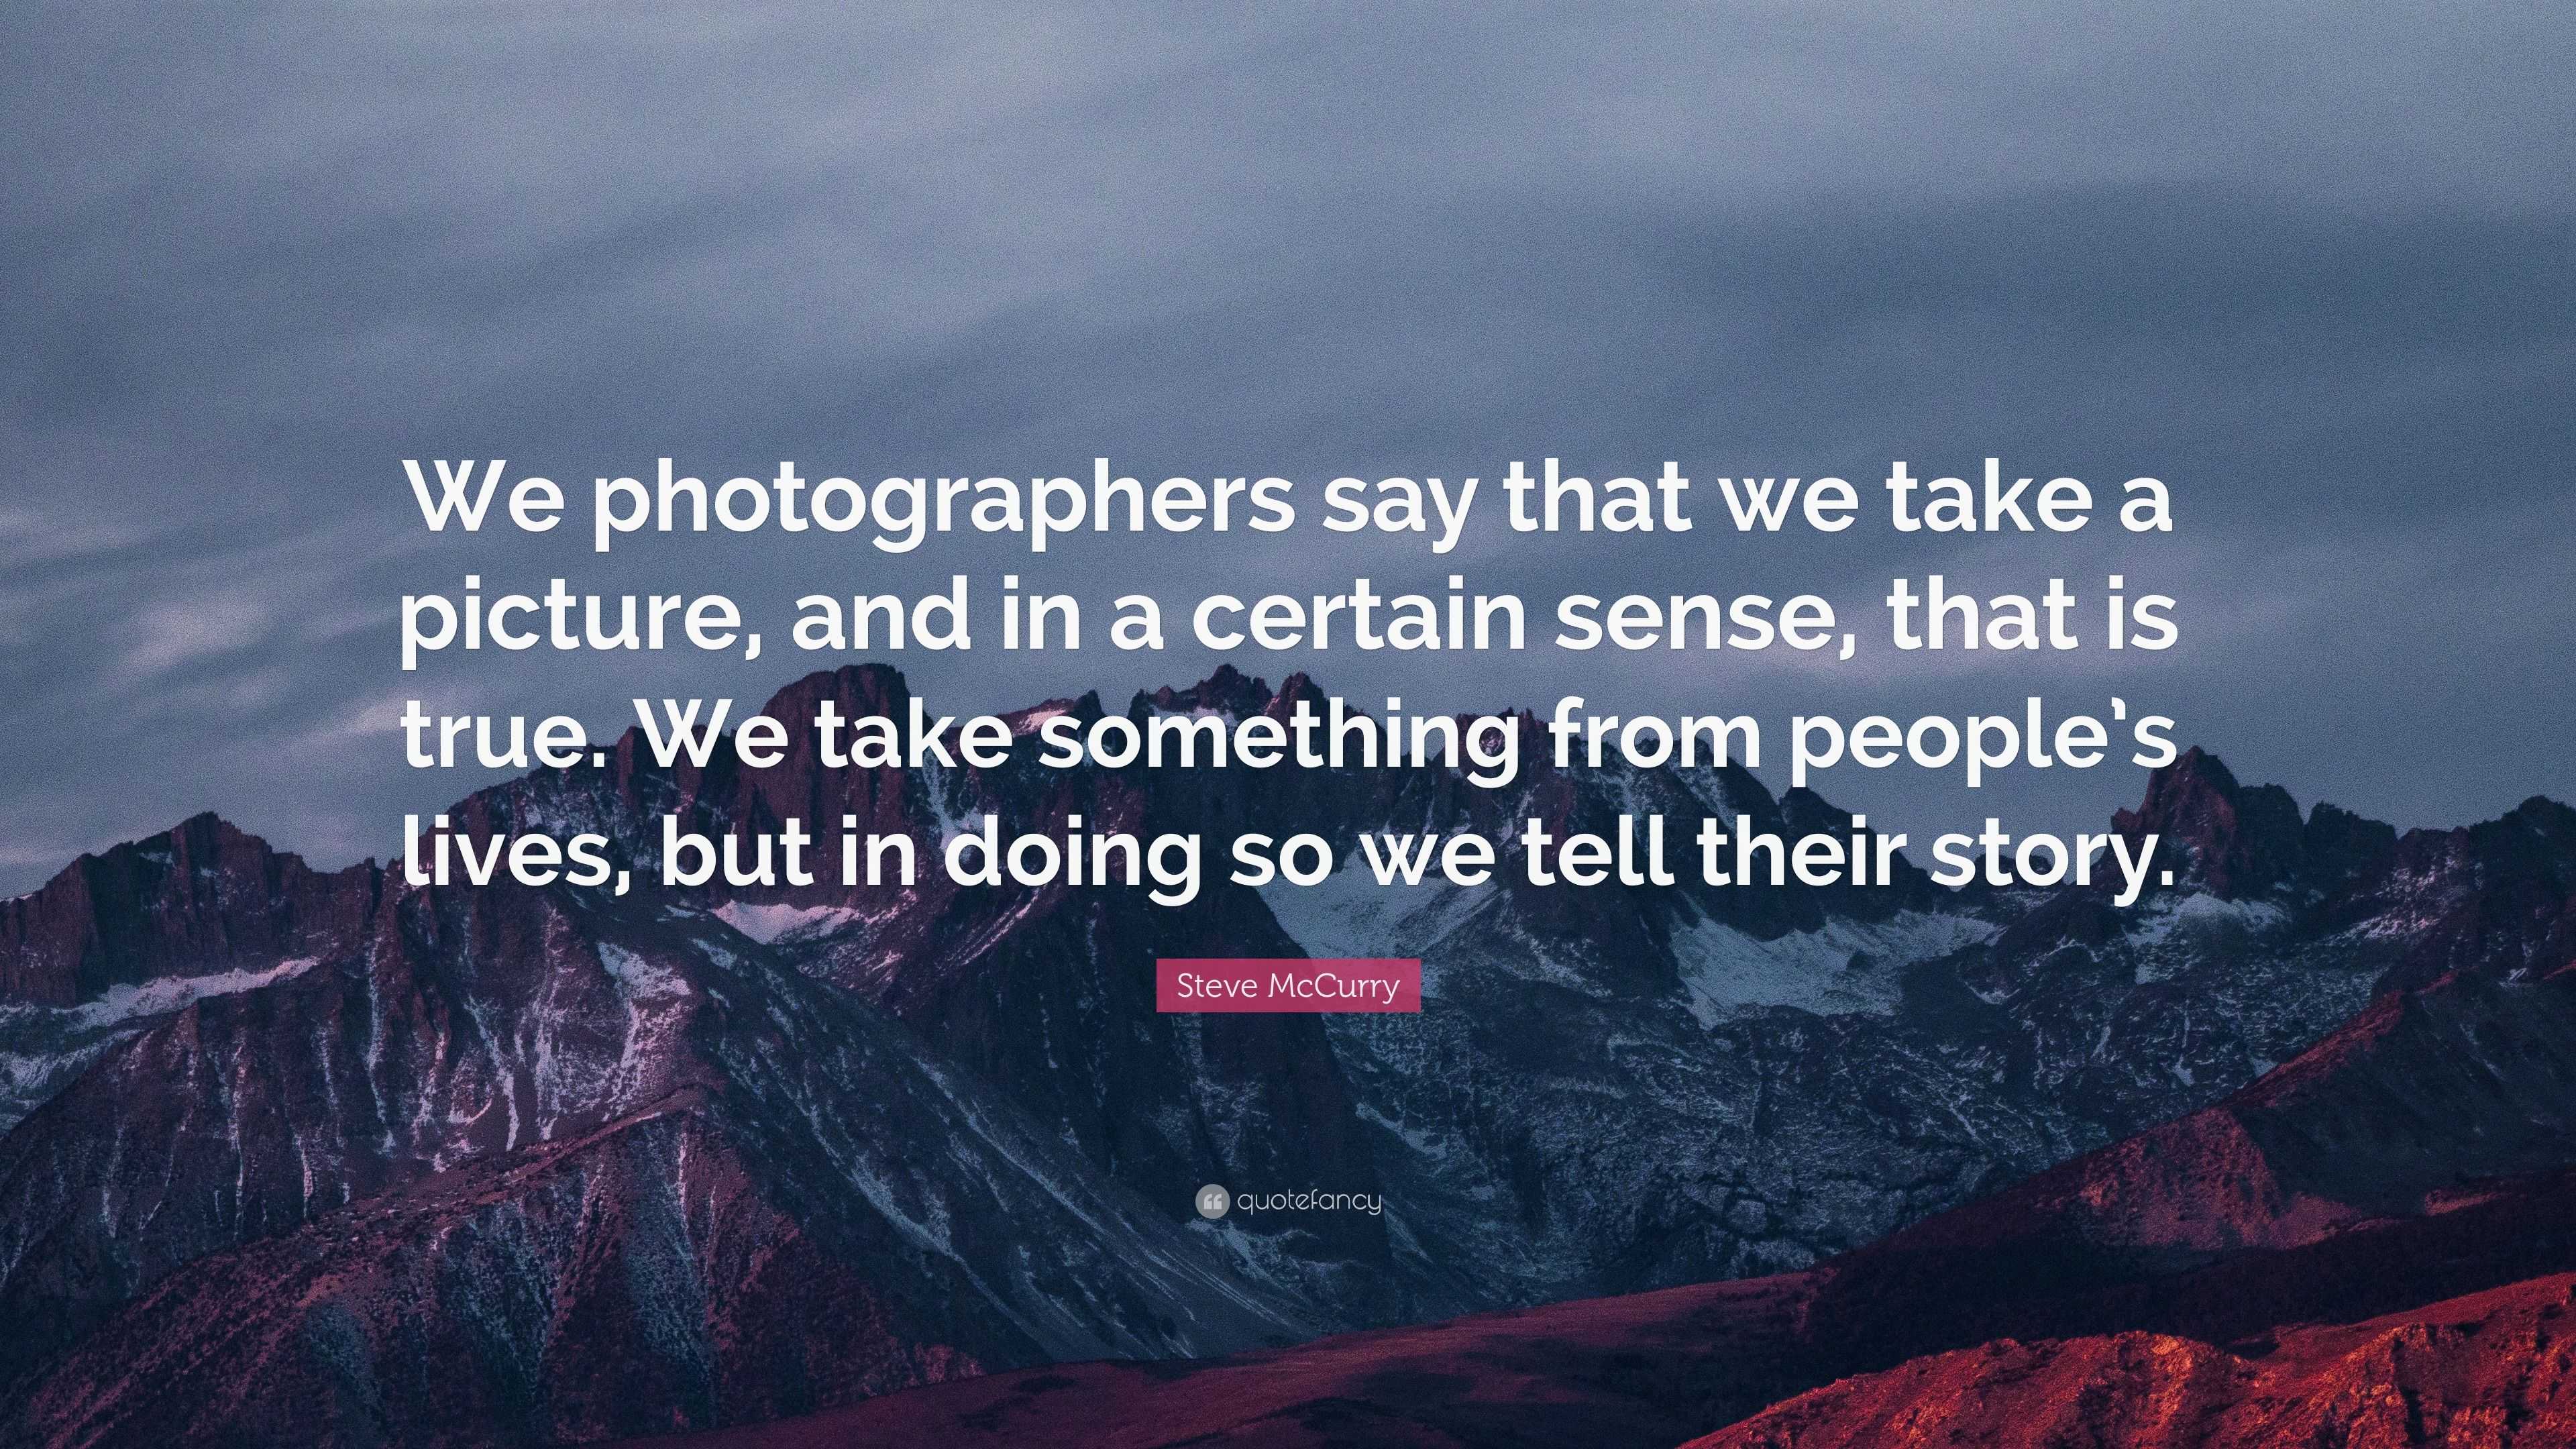 Steve McCurry Quote: “We photographers say that we take a picture, and ...